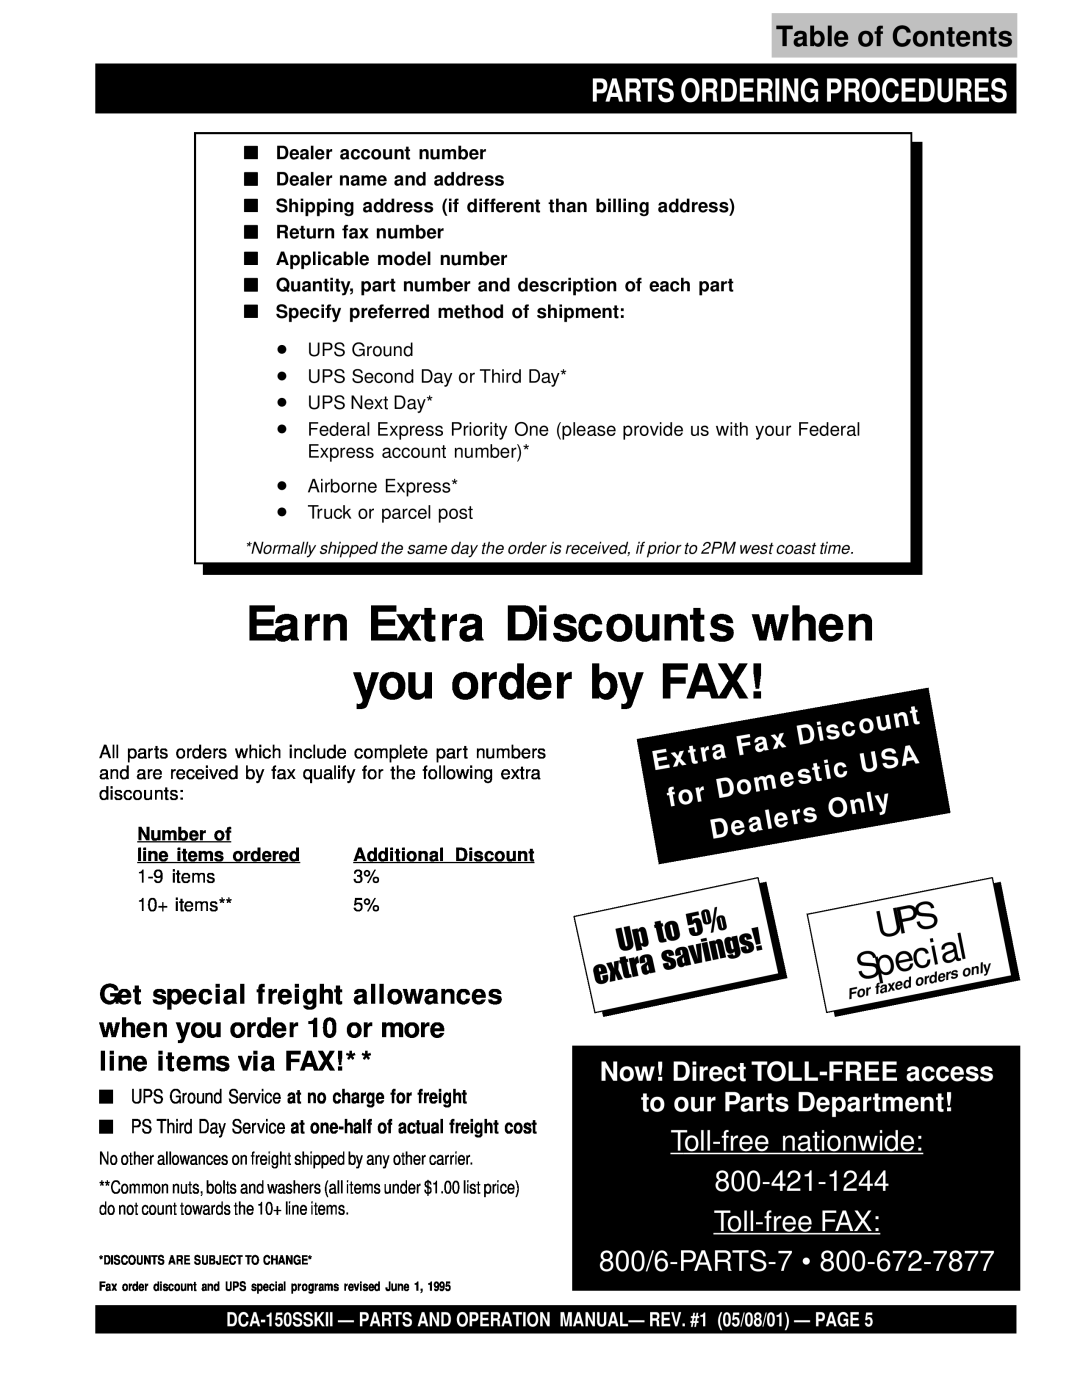 Multiquip DCA-150SSKII Earn Extra Discounts when you order by FAX, Parts Ordering Procedures, Domestic, Only, Dealers 